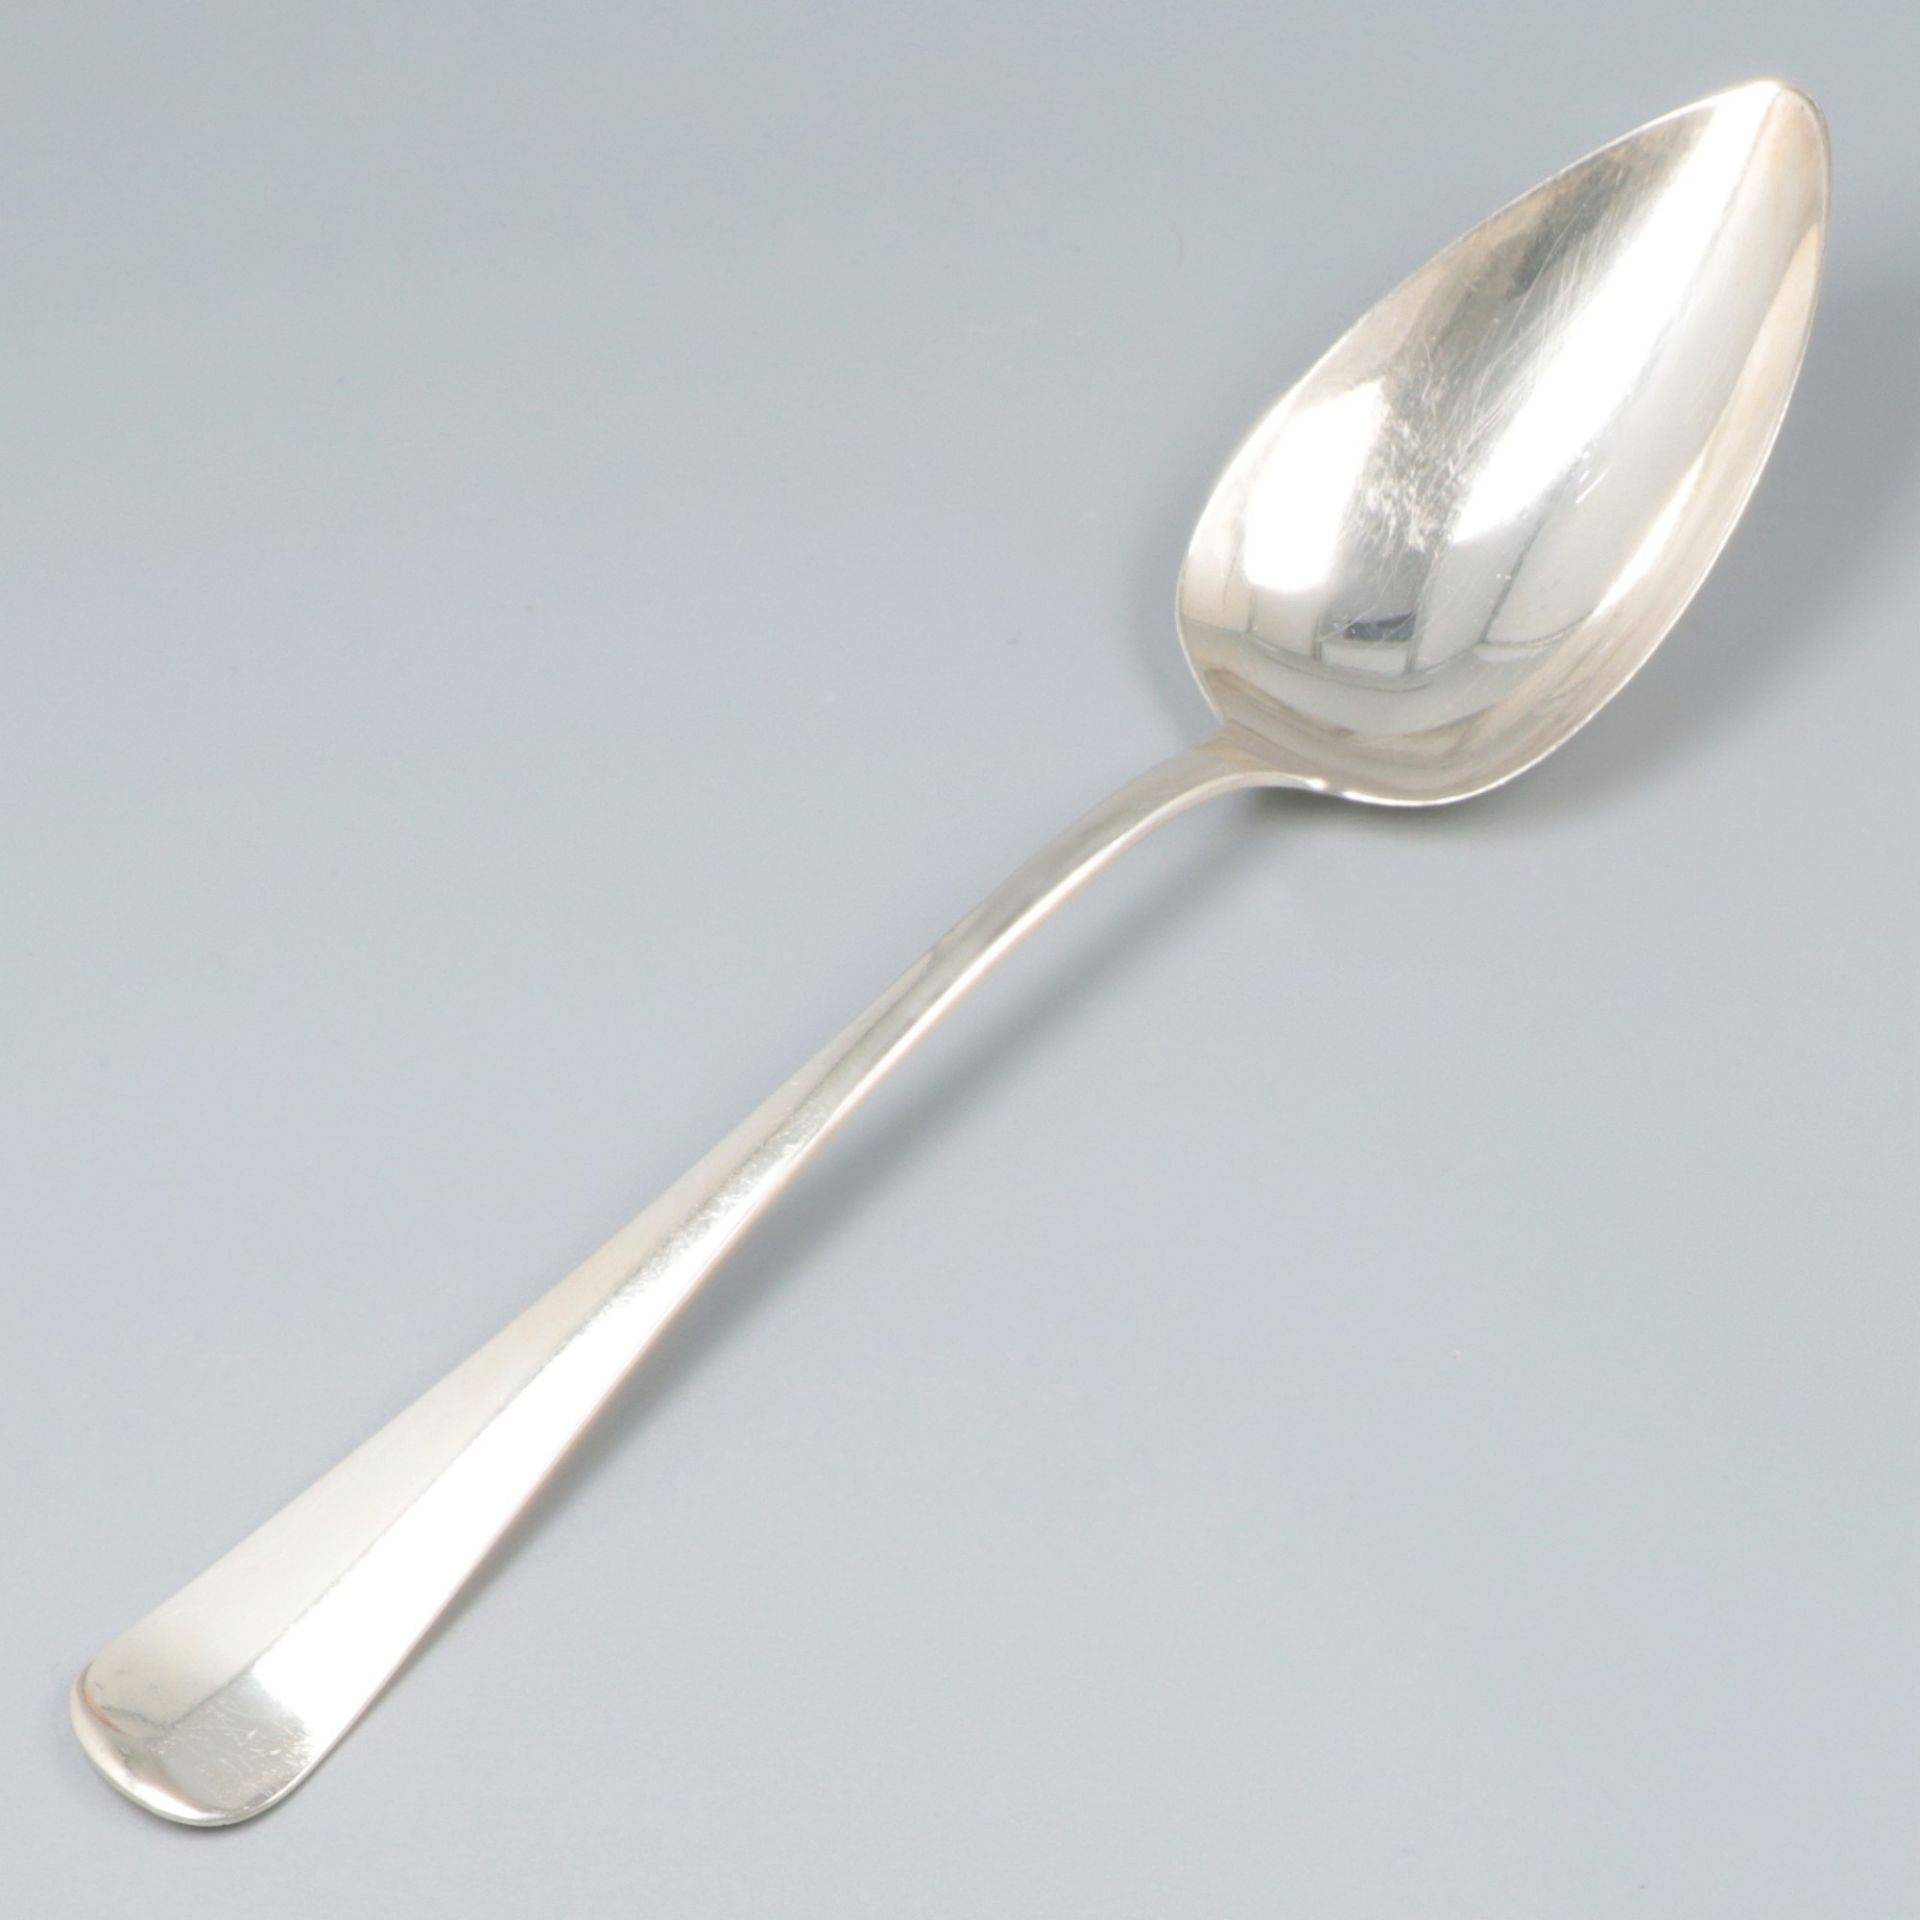 Sauce spoon, vegetable serving spoon & potato serving spoon "Haags Lofje", silver. - Image 2 of 6